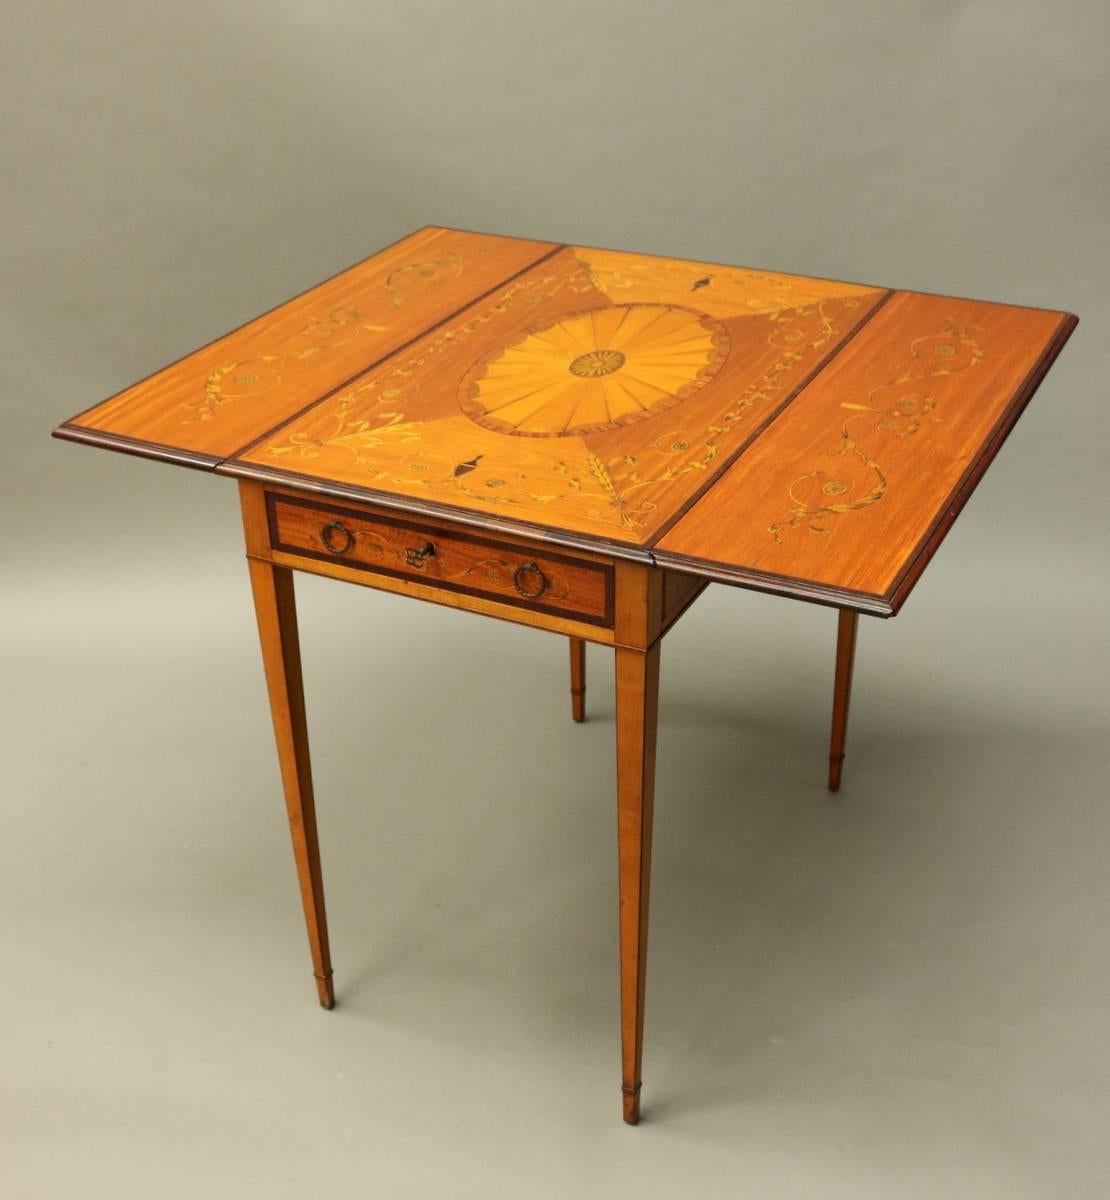 English Antique Adams Style Rosewood and Mahogany Marquetry Pembroke Table, circa 1900